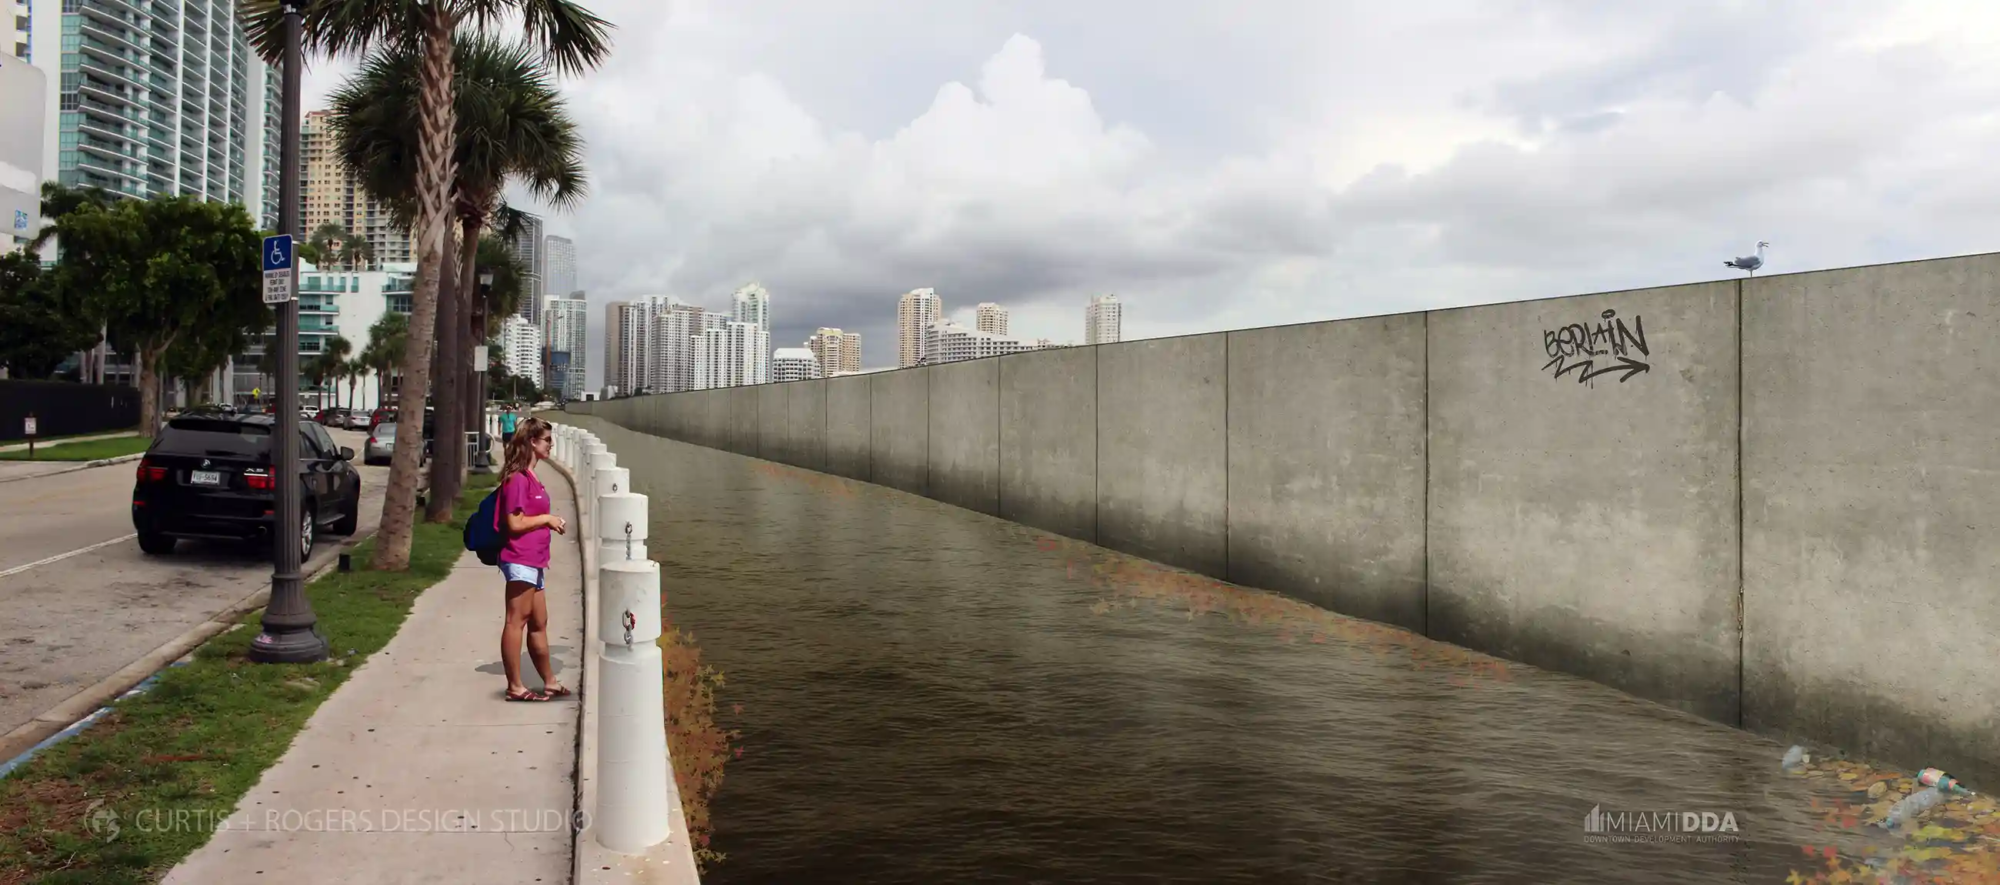 3D render of a concrete wall that has been placed in the water, meaning any view from the street to the water is blocked. There's also graffiti on the wall and some trash in the moat of water that is visible.